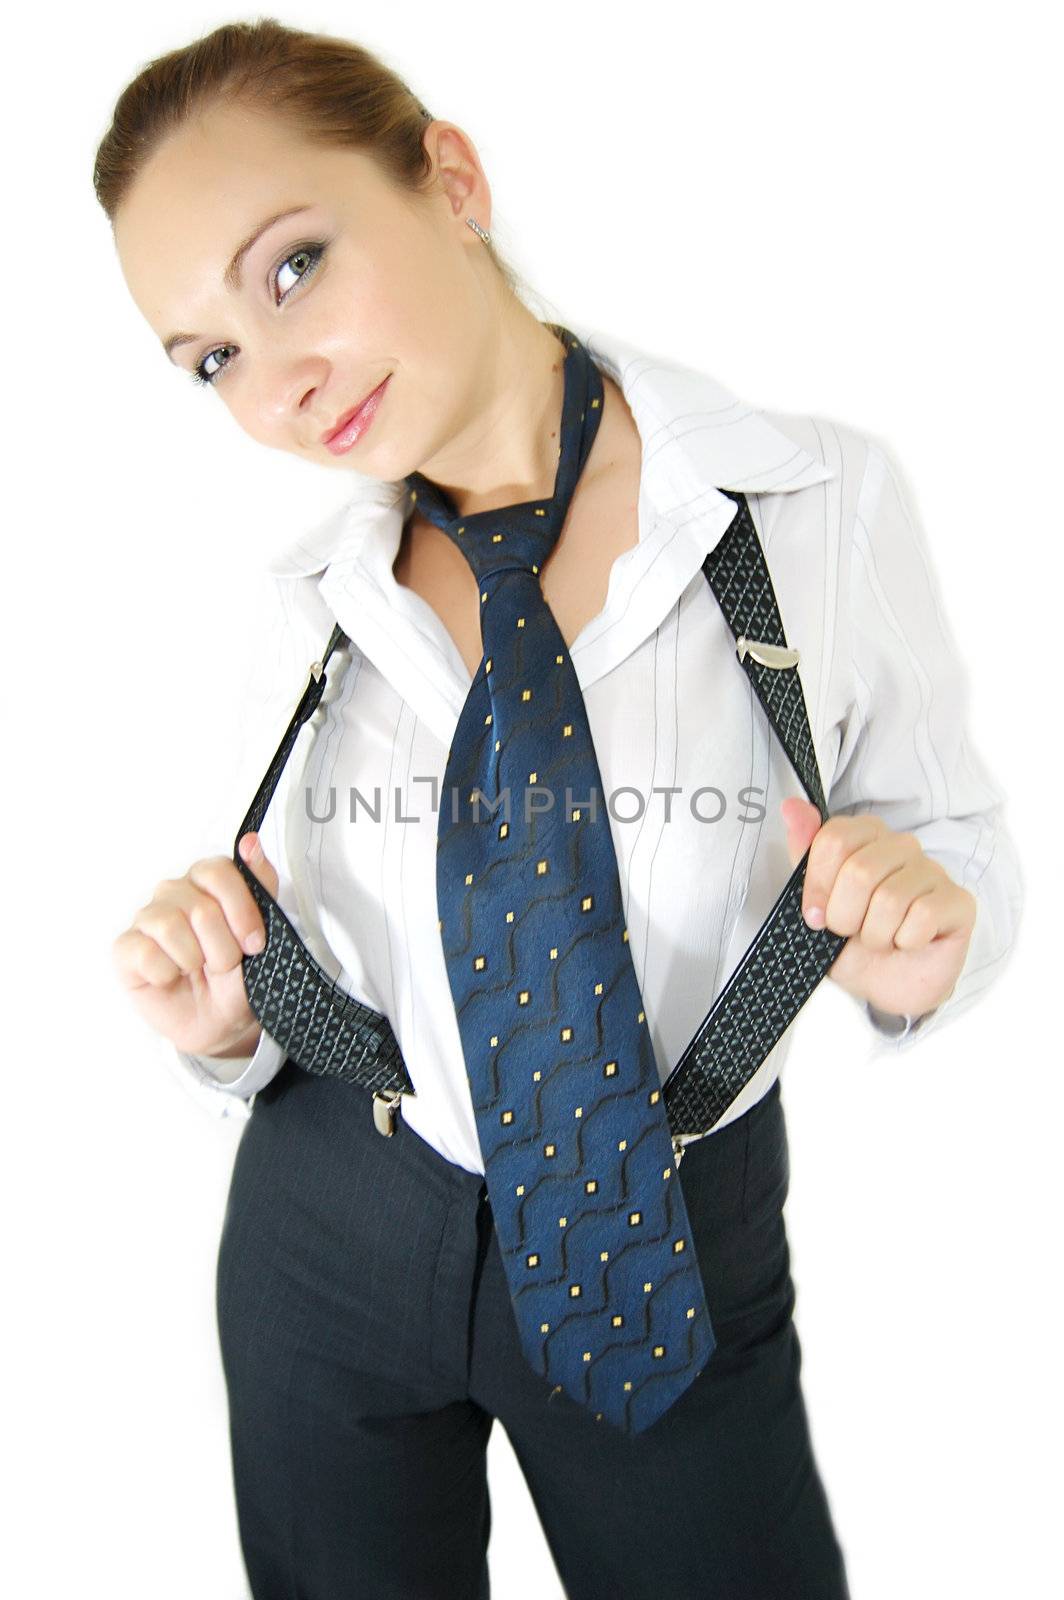 Girl in male costume, tie and suspenders